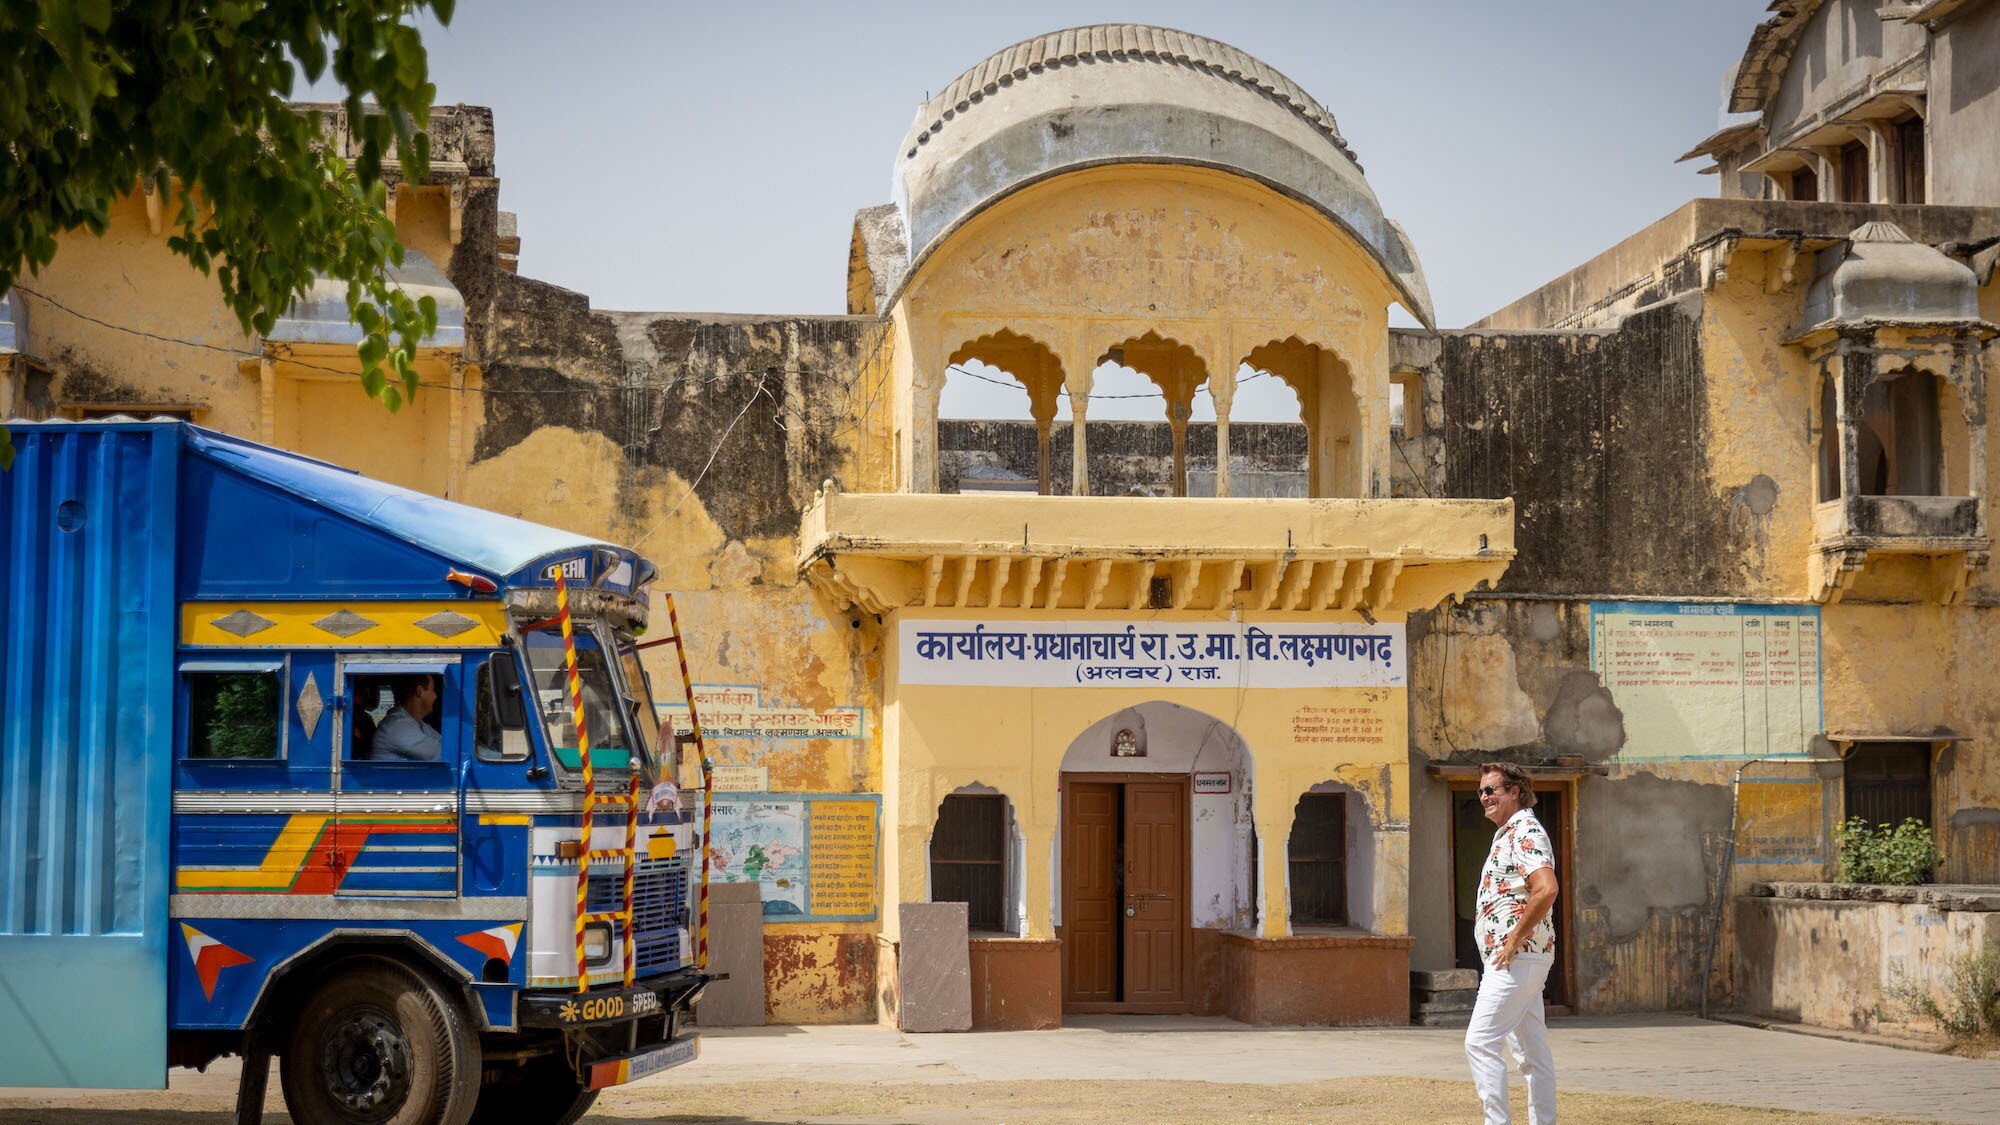 Rory Millikin watches as the completed water treatment truck is delivered in Alwar, Rajasthan, India, as seen on Disney's RENNERVATIONS. (Disney/Mansi Midha)